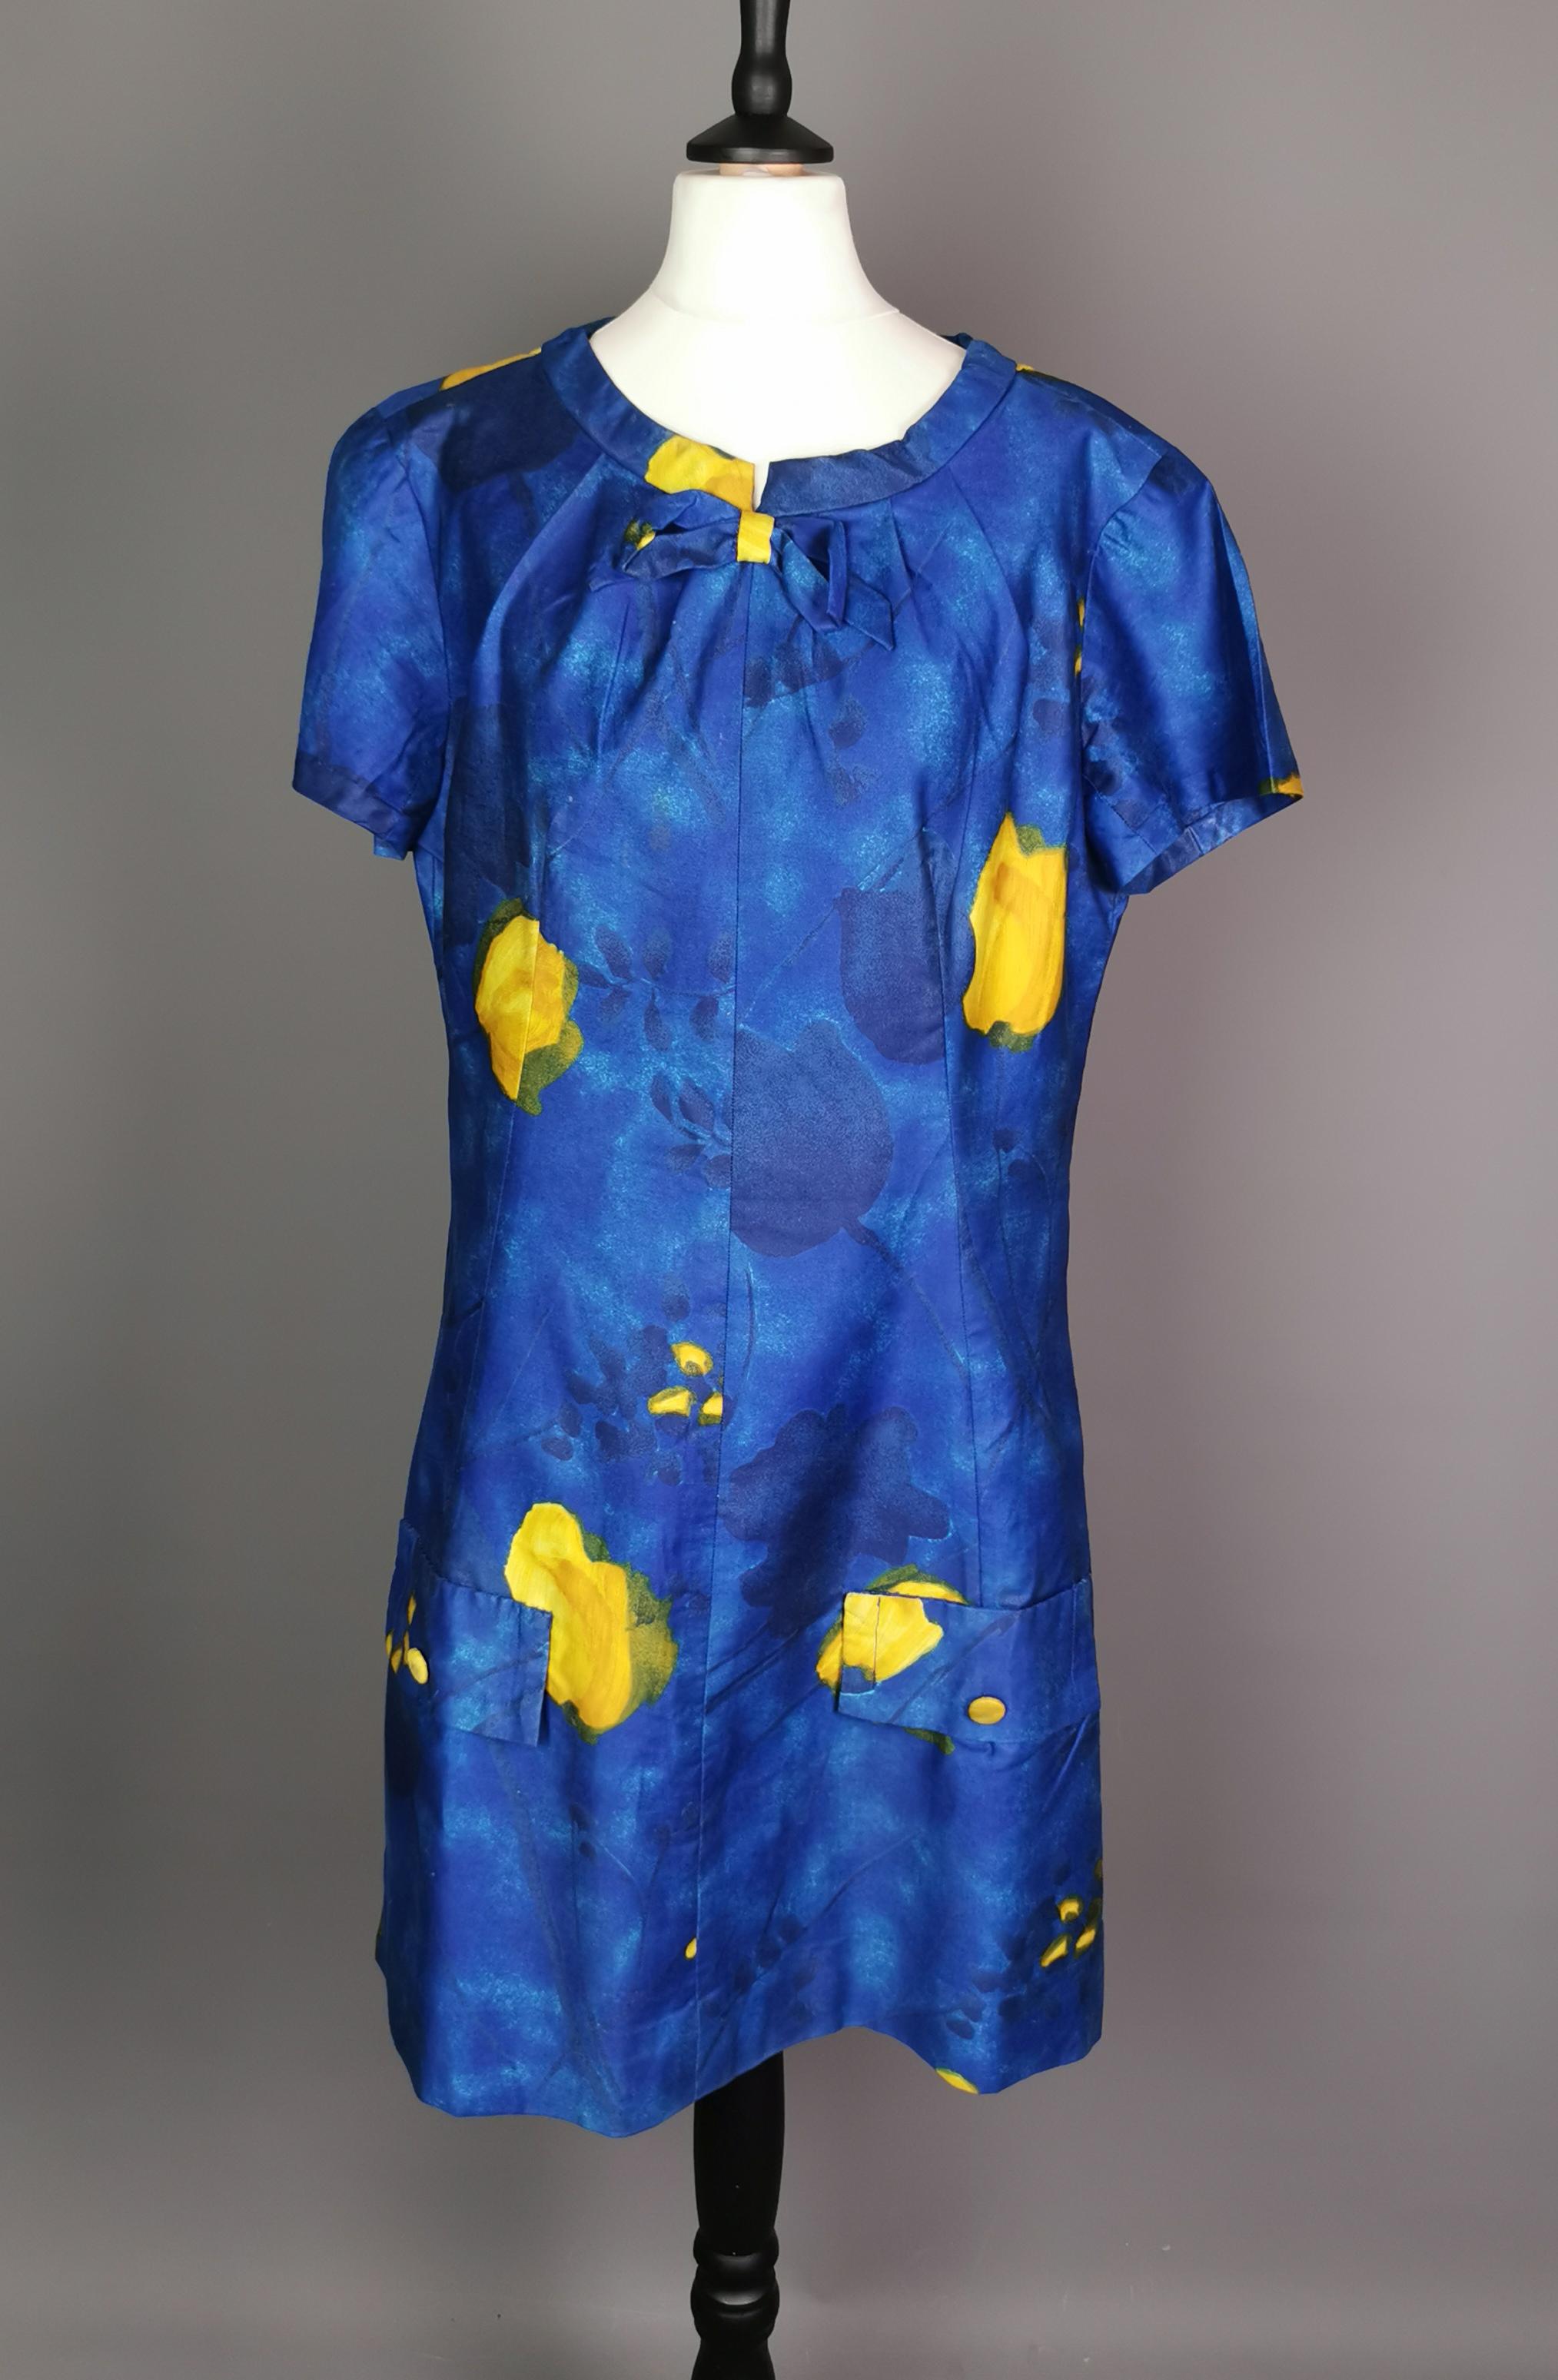 A fantastic vintage late c1960s Mod mini dress.

It is made from a synthetic cotton blend, nipped in waist with an A line skirt in a vibrant blue witb with a yellow pattern, very colourful.

It has a round crew neck with a sweet bow.

The dress has